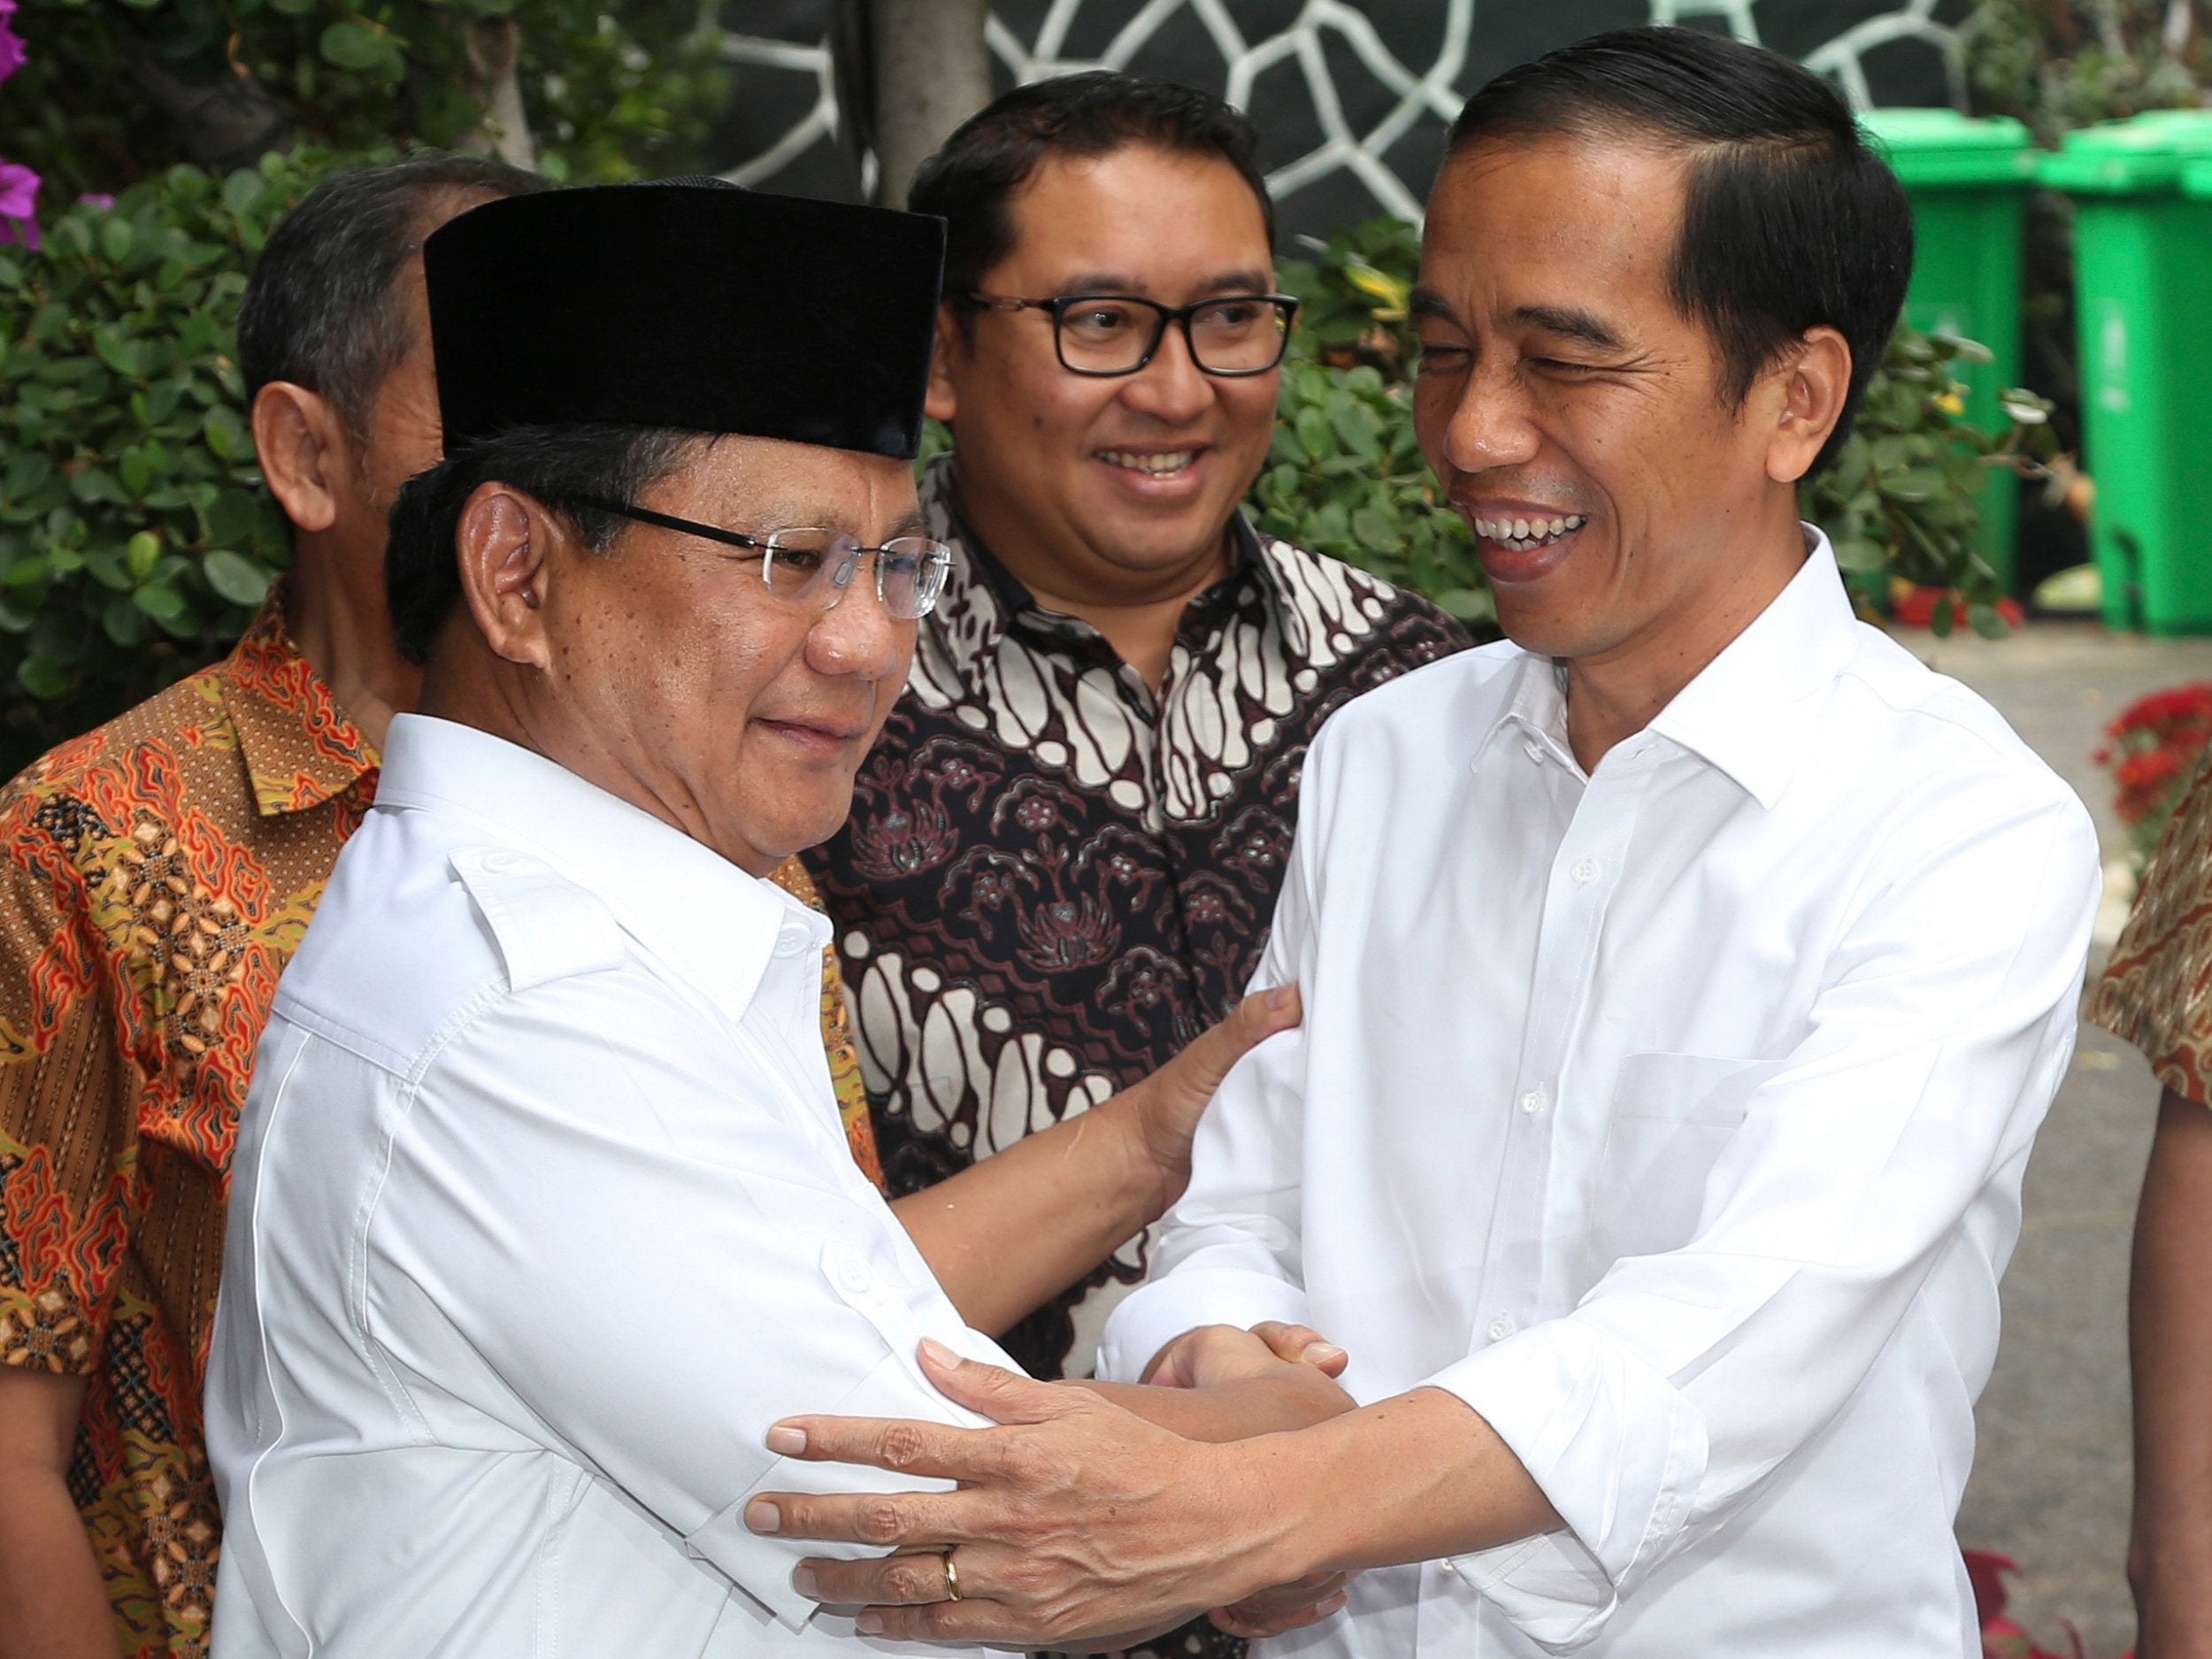 File image shows then Indonesia's President-elect Joko Widodo, right, with his political rival Prabowo Subianto, after the 2014 election. This year's vote is a re-run of that contest